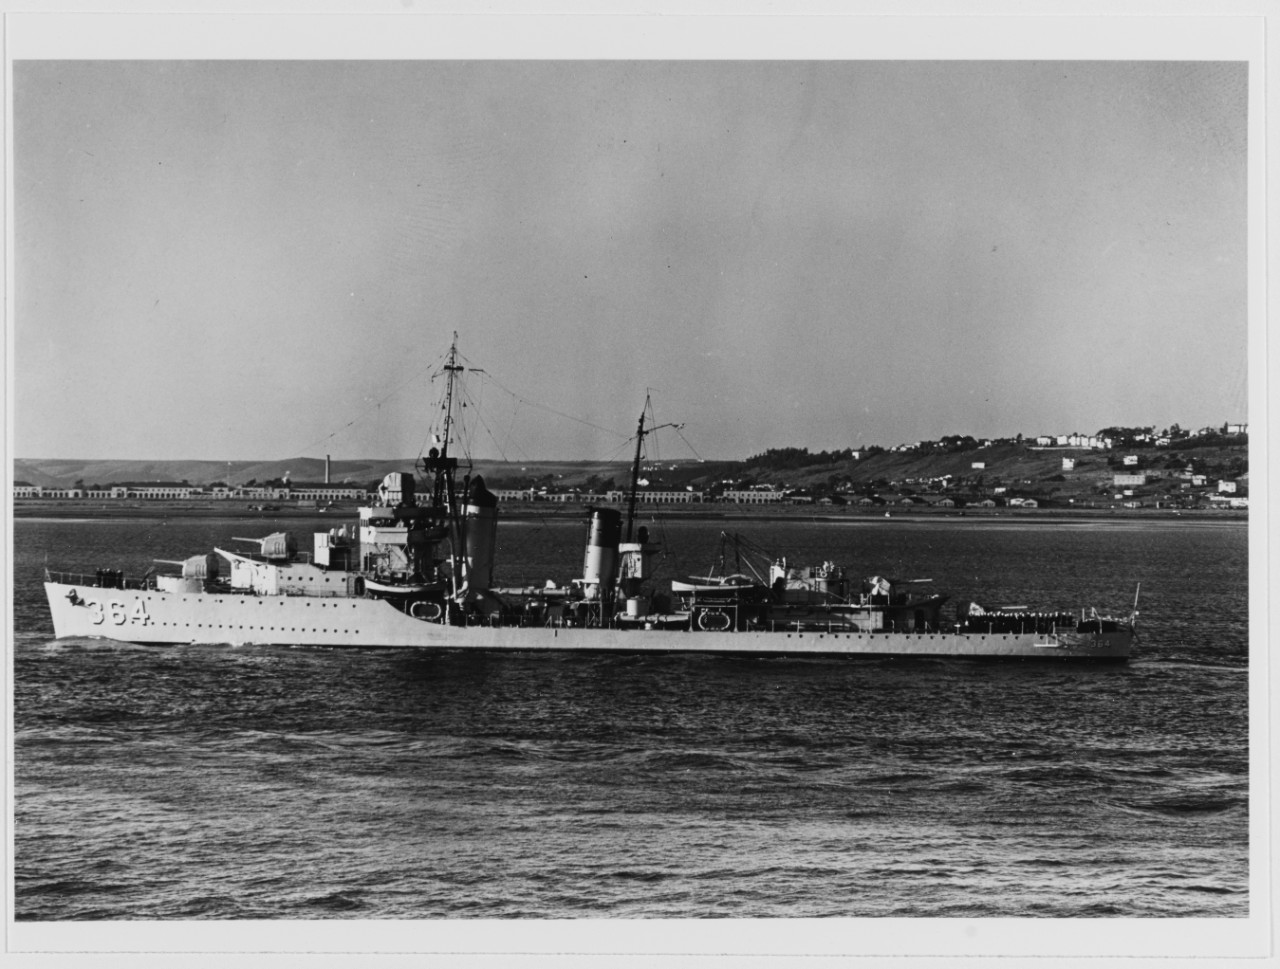 USS MAHAN (DD-364) photographed in harbor, during the later 1930s